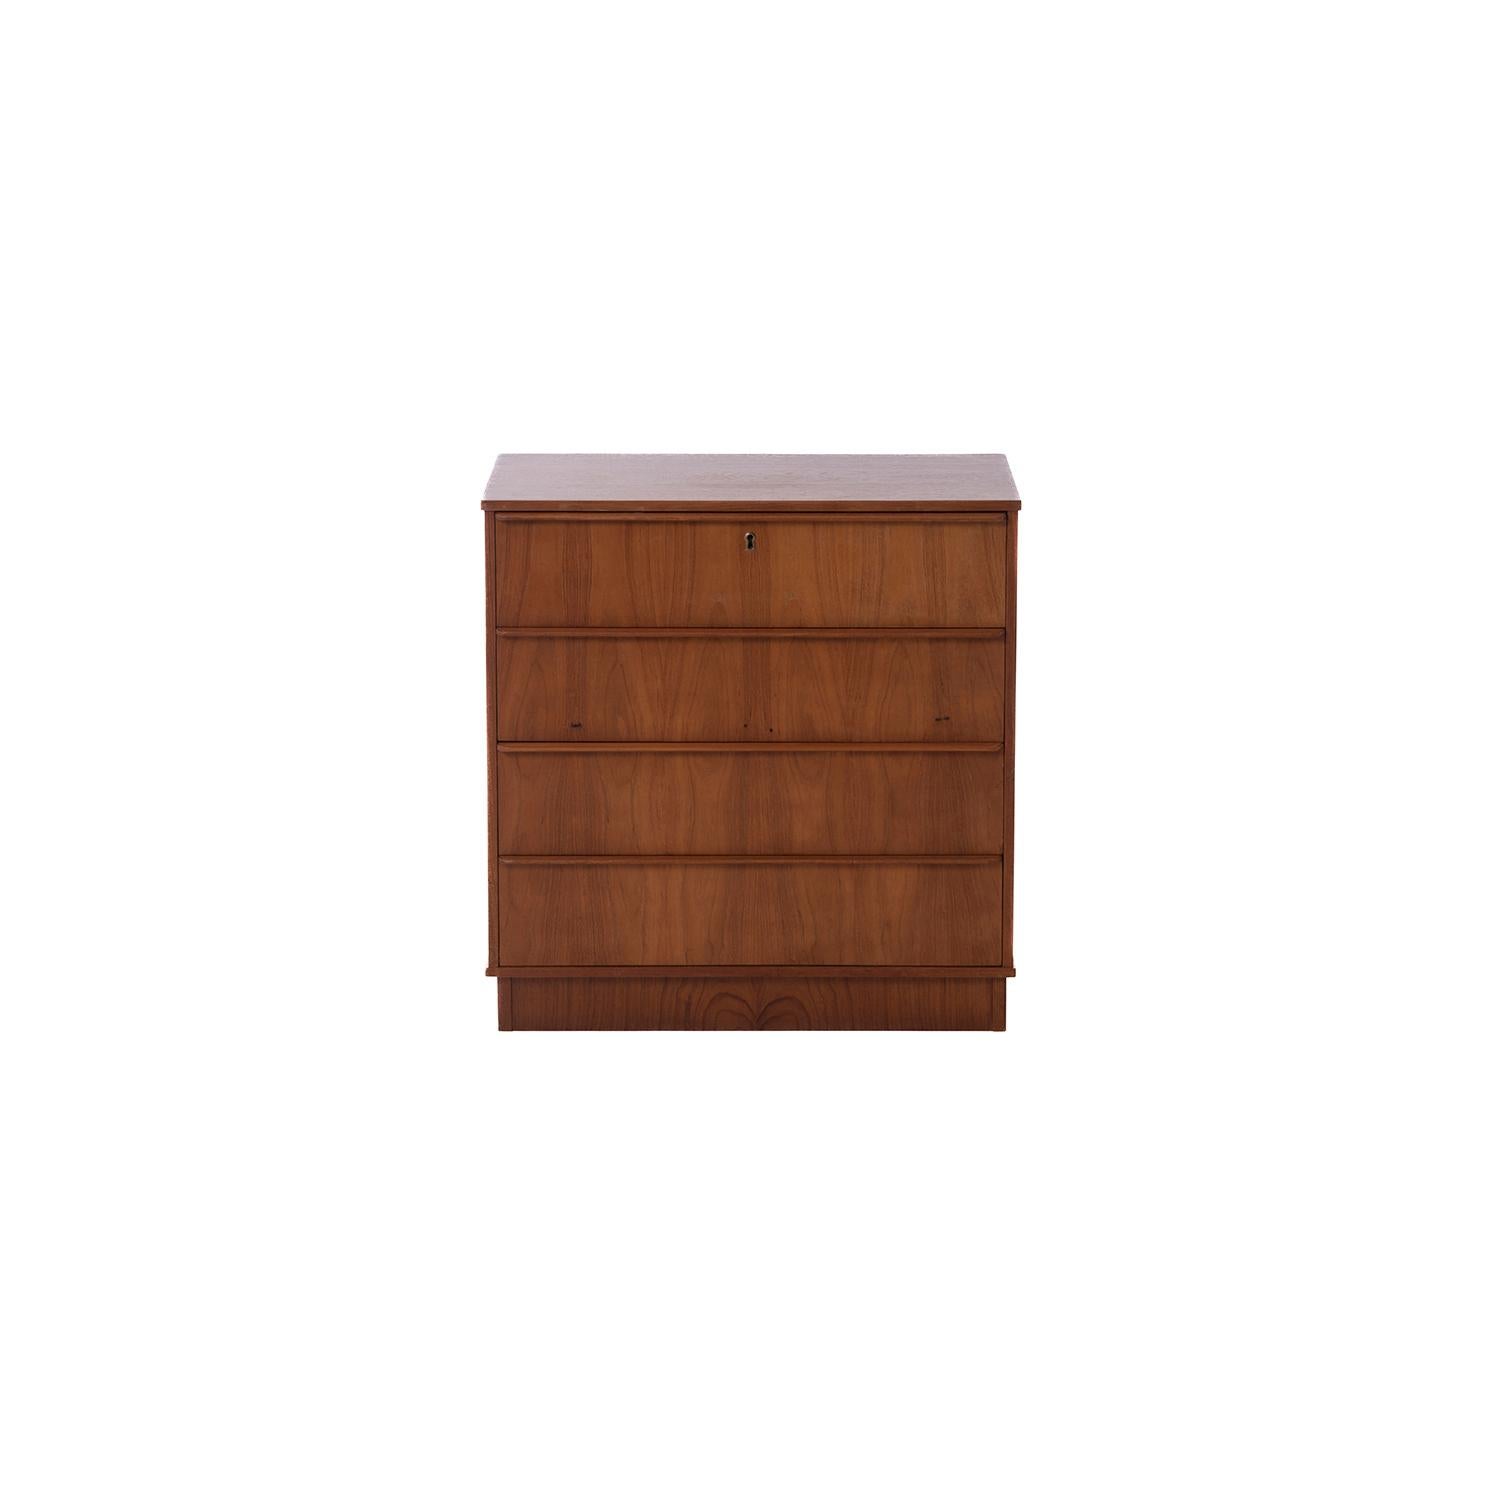 Danish modern teak chest of drawers.


Professional, skilled furniture restoration is an integral part of what we do every day. Our goal is to provide beautiful, functional furniture that honors its illustrious past. Our restoration workshop is